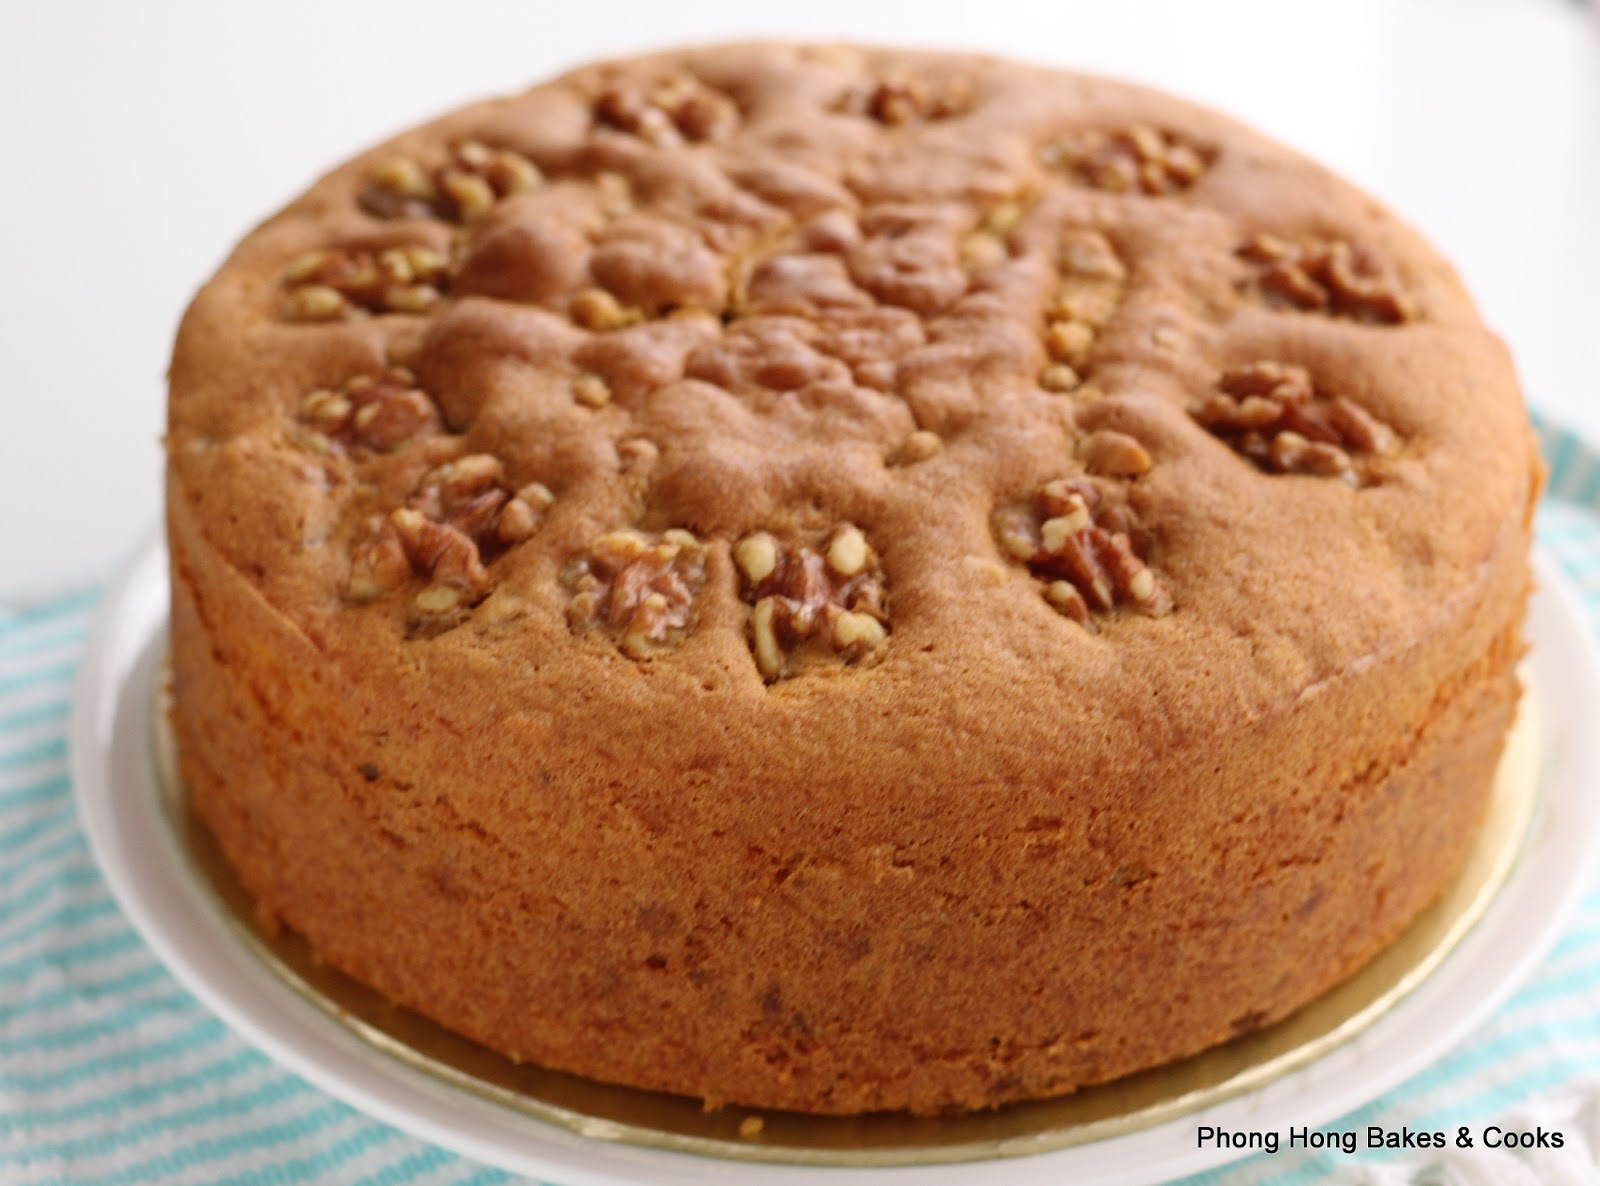 Phong Hong Bakes and Cooks!: A Nutty Cake